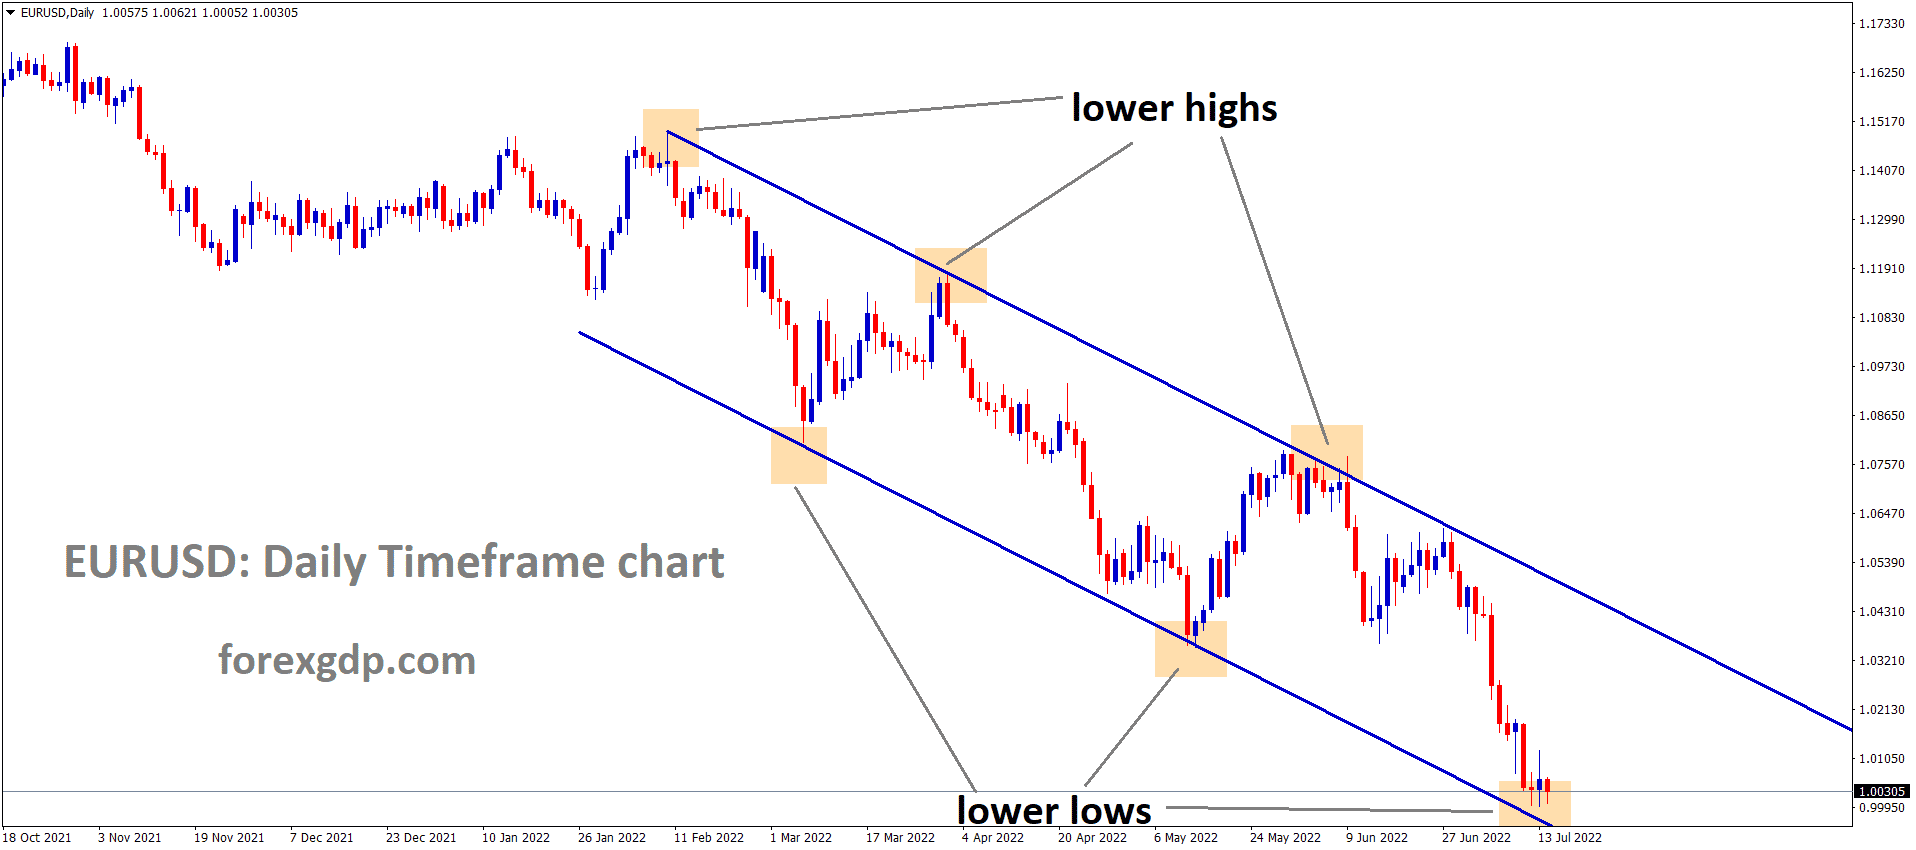 EURUSD is moving in the Descending channel and the market has reached the Lower low area of the channel 1